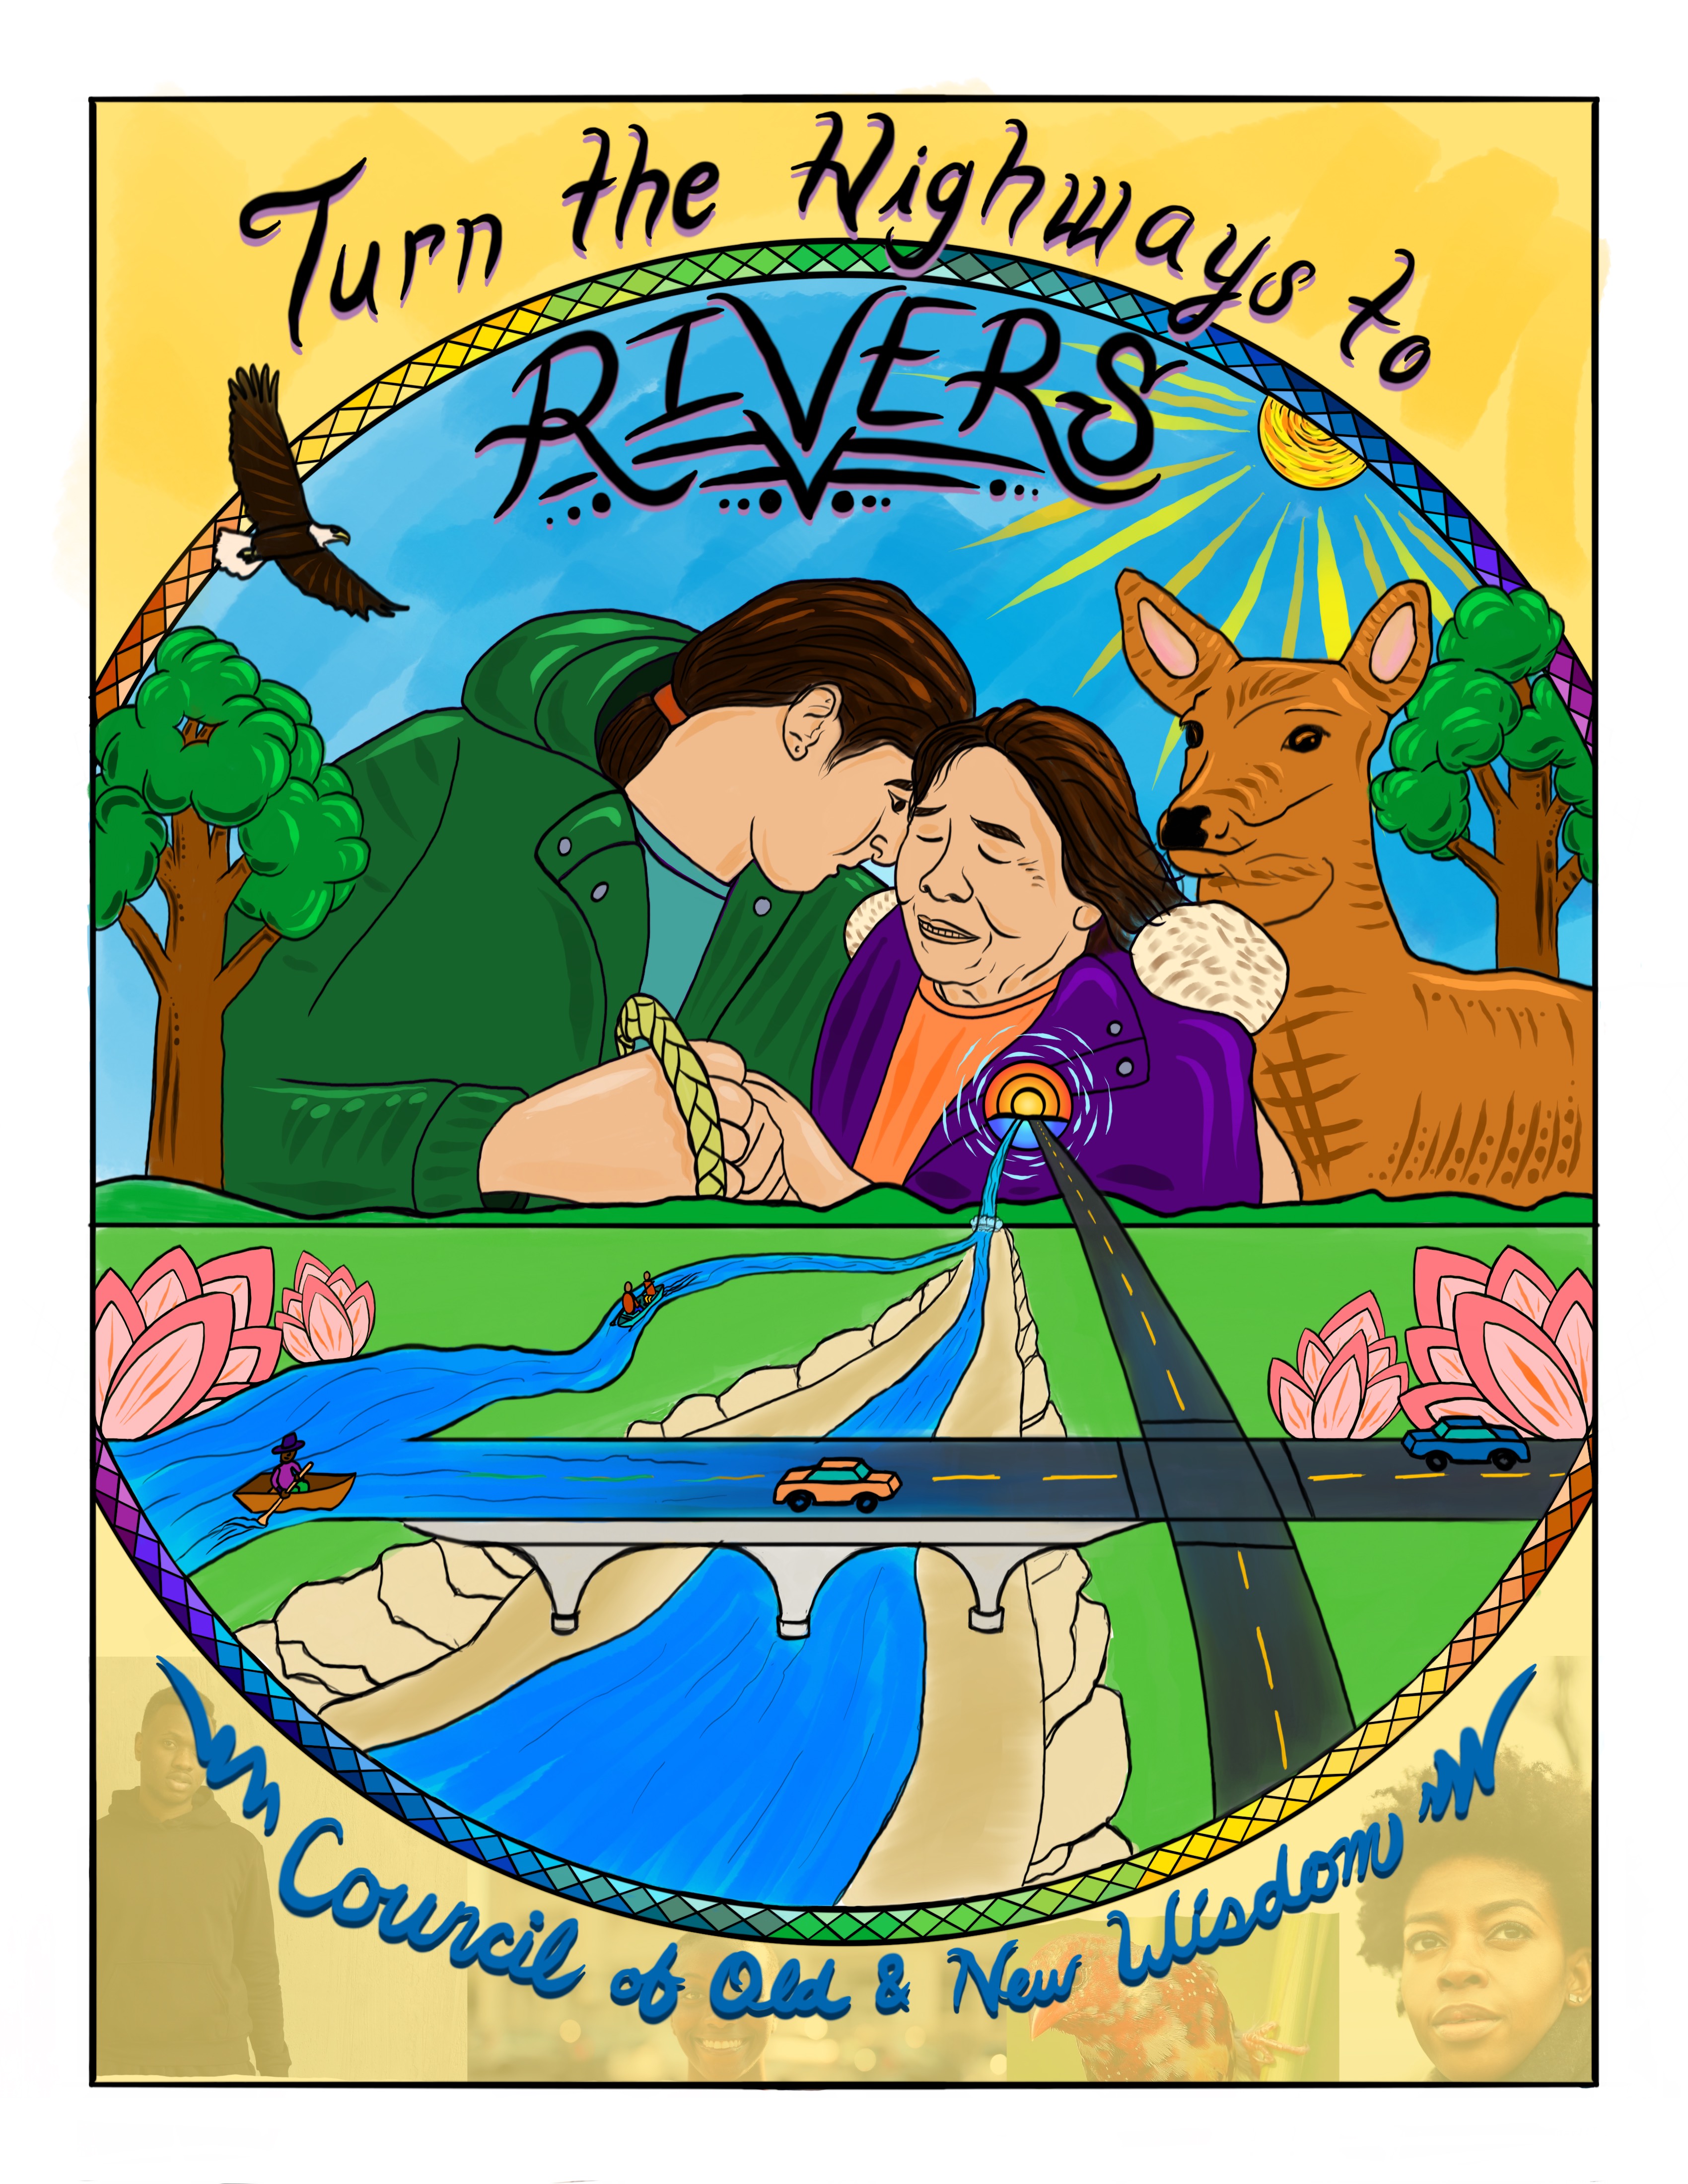 Turn Highways Into the Rivers illustration by graphic artist Bayou Bay showing a river, a highway, a deer and two Native Americans.